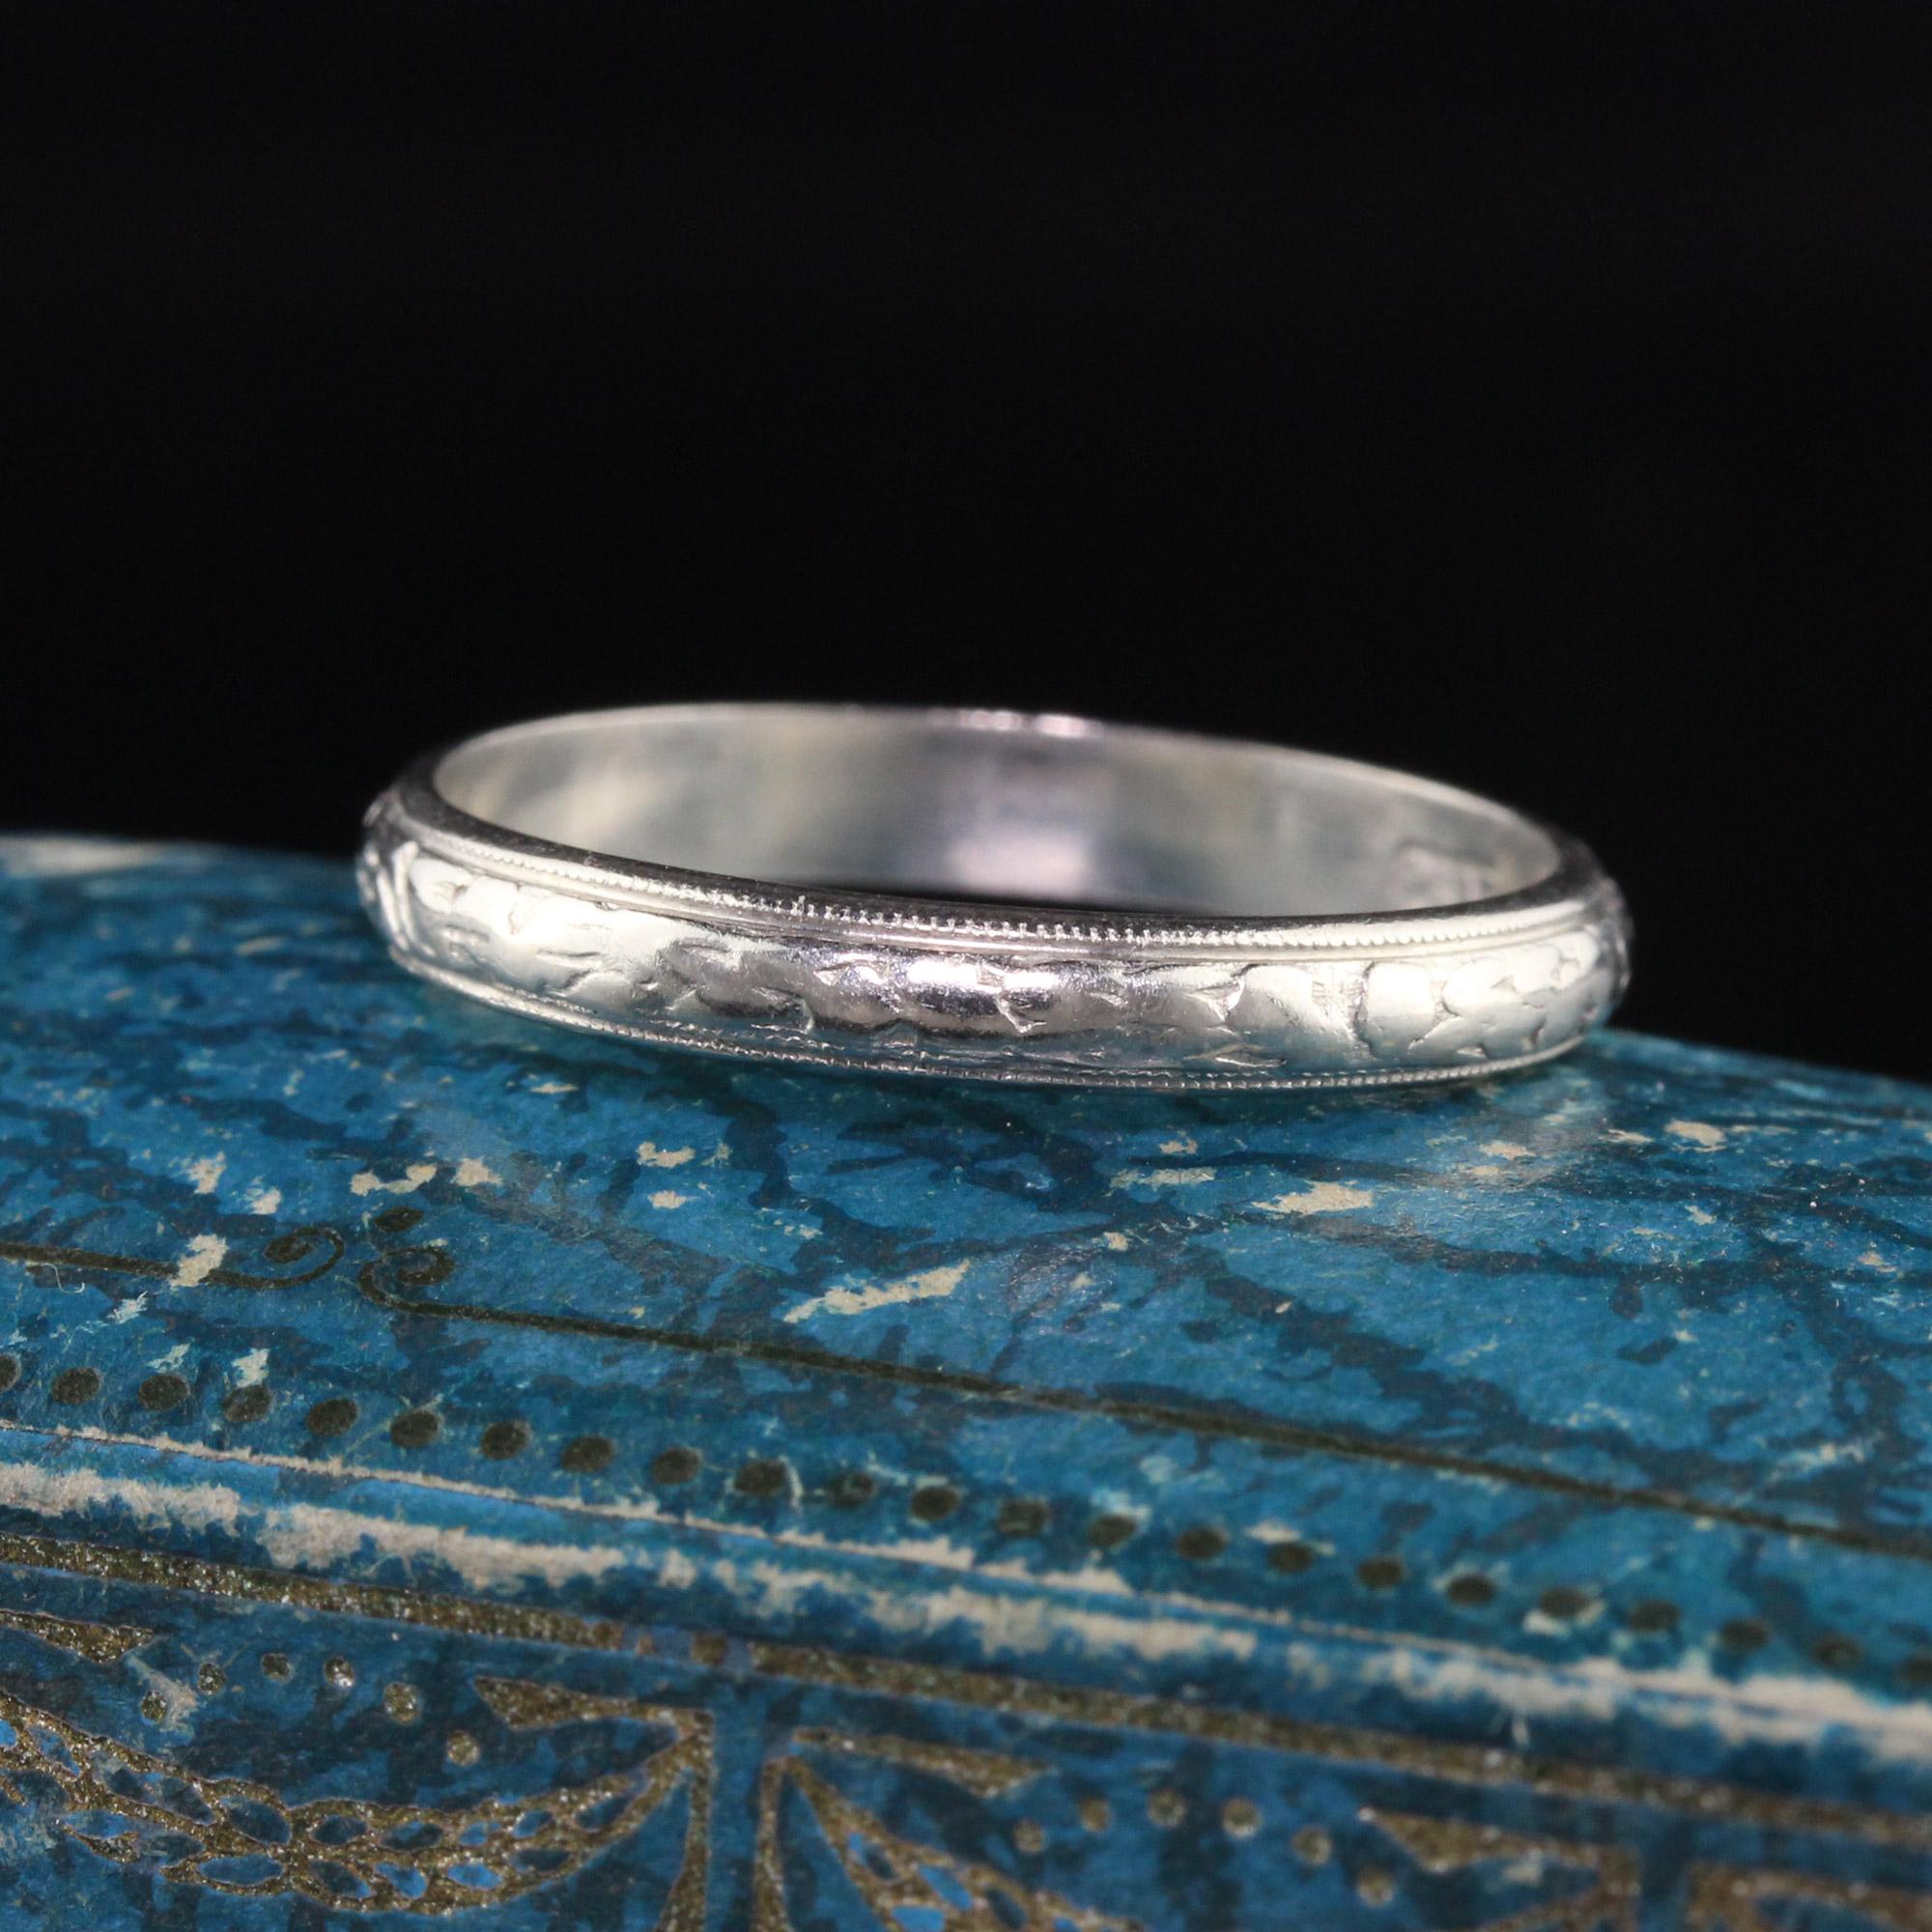 Beautiful Antique Art Deco Platinum Engraved Wedding Band - Size 8 1/4. This gorgeous wedding band is crafted in platinum and has engravings going around the entire ring.

Item #R1263

Metal: Platinum

Weight: 4 Grams

Size: 8 1/4

Measurements: Top